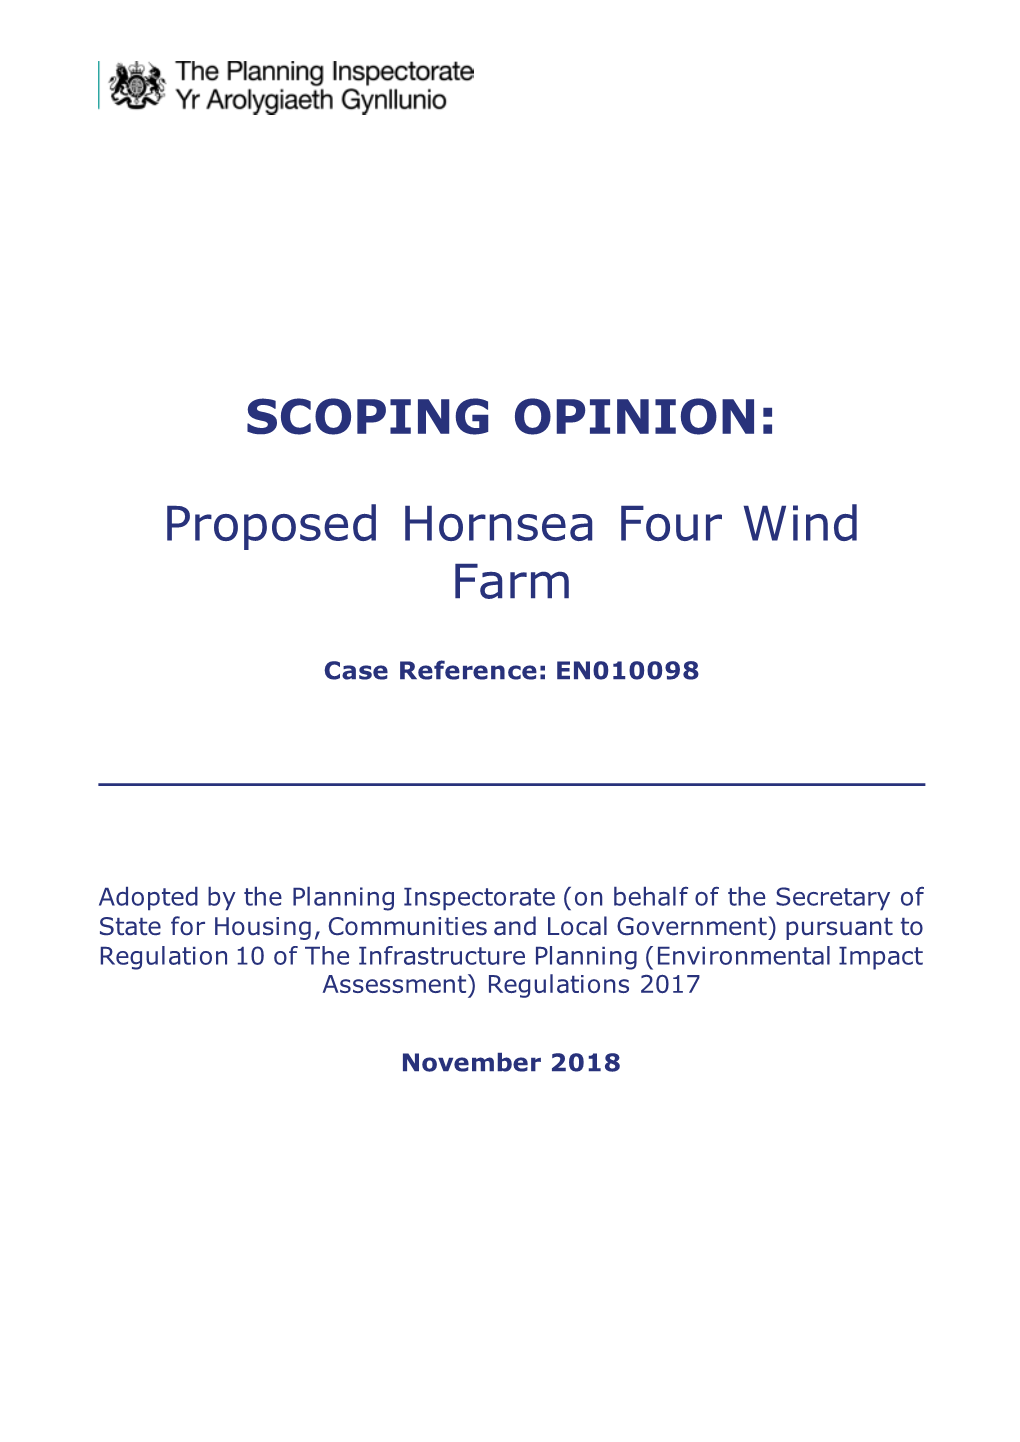 SCOPING OPINION: Proposed Hornsea Four Wind Farm